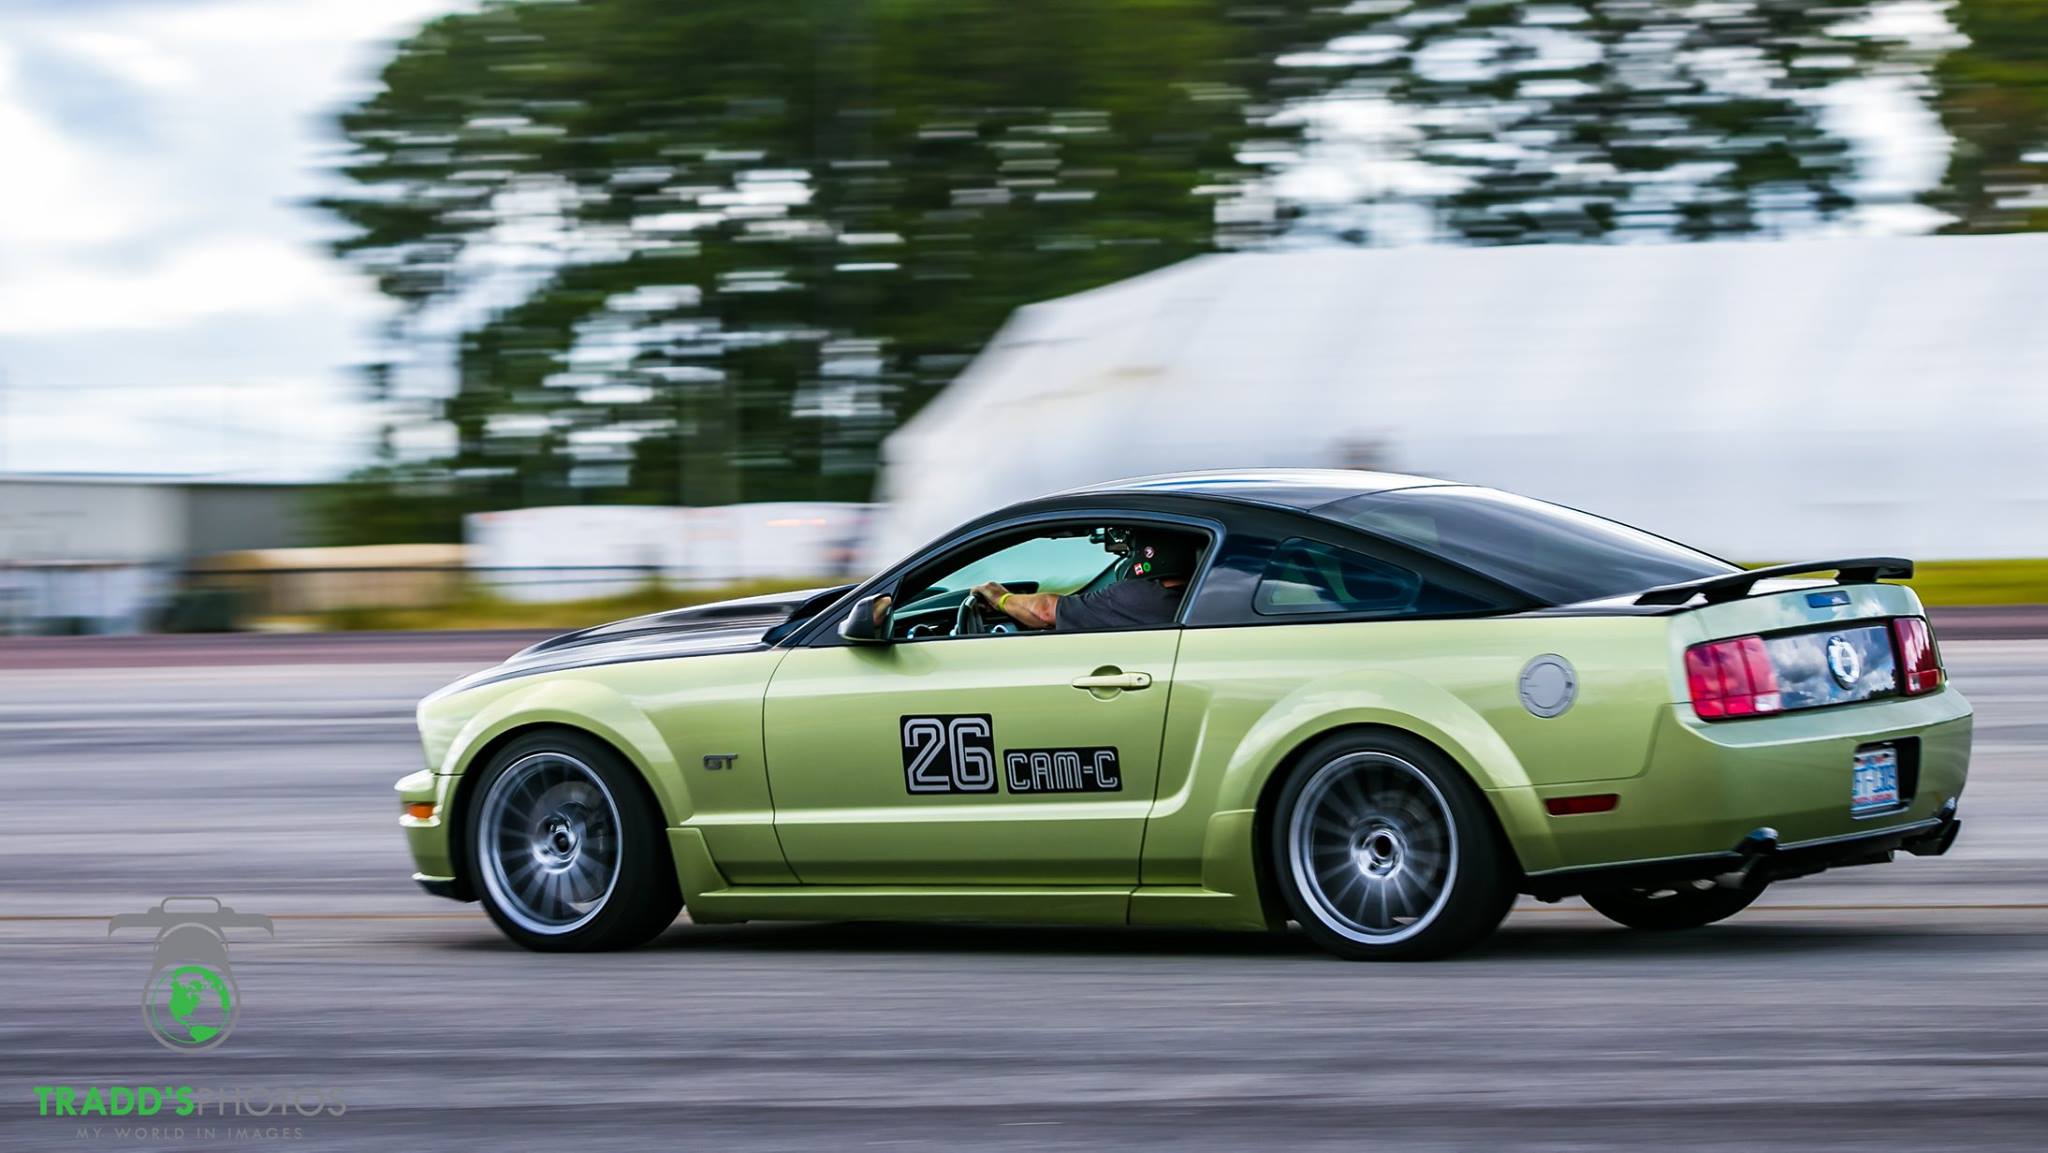 2005 Mustang
GT_46L  (Fiona - Road Course, AutoX, and Optima Build)